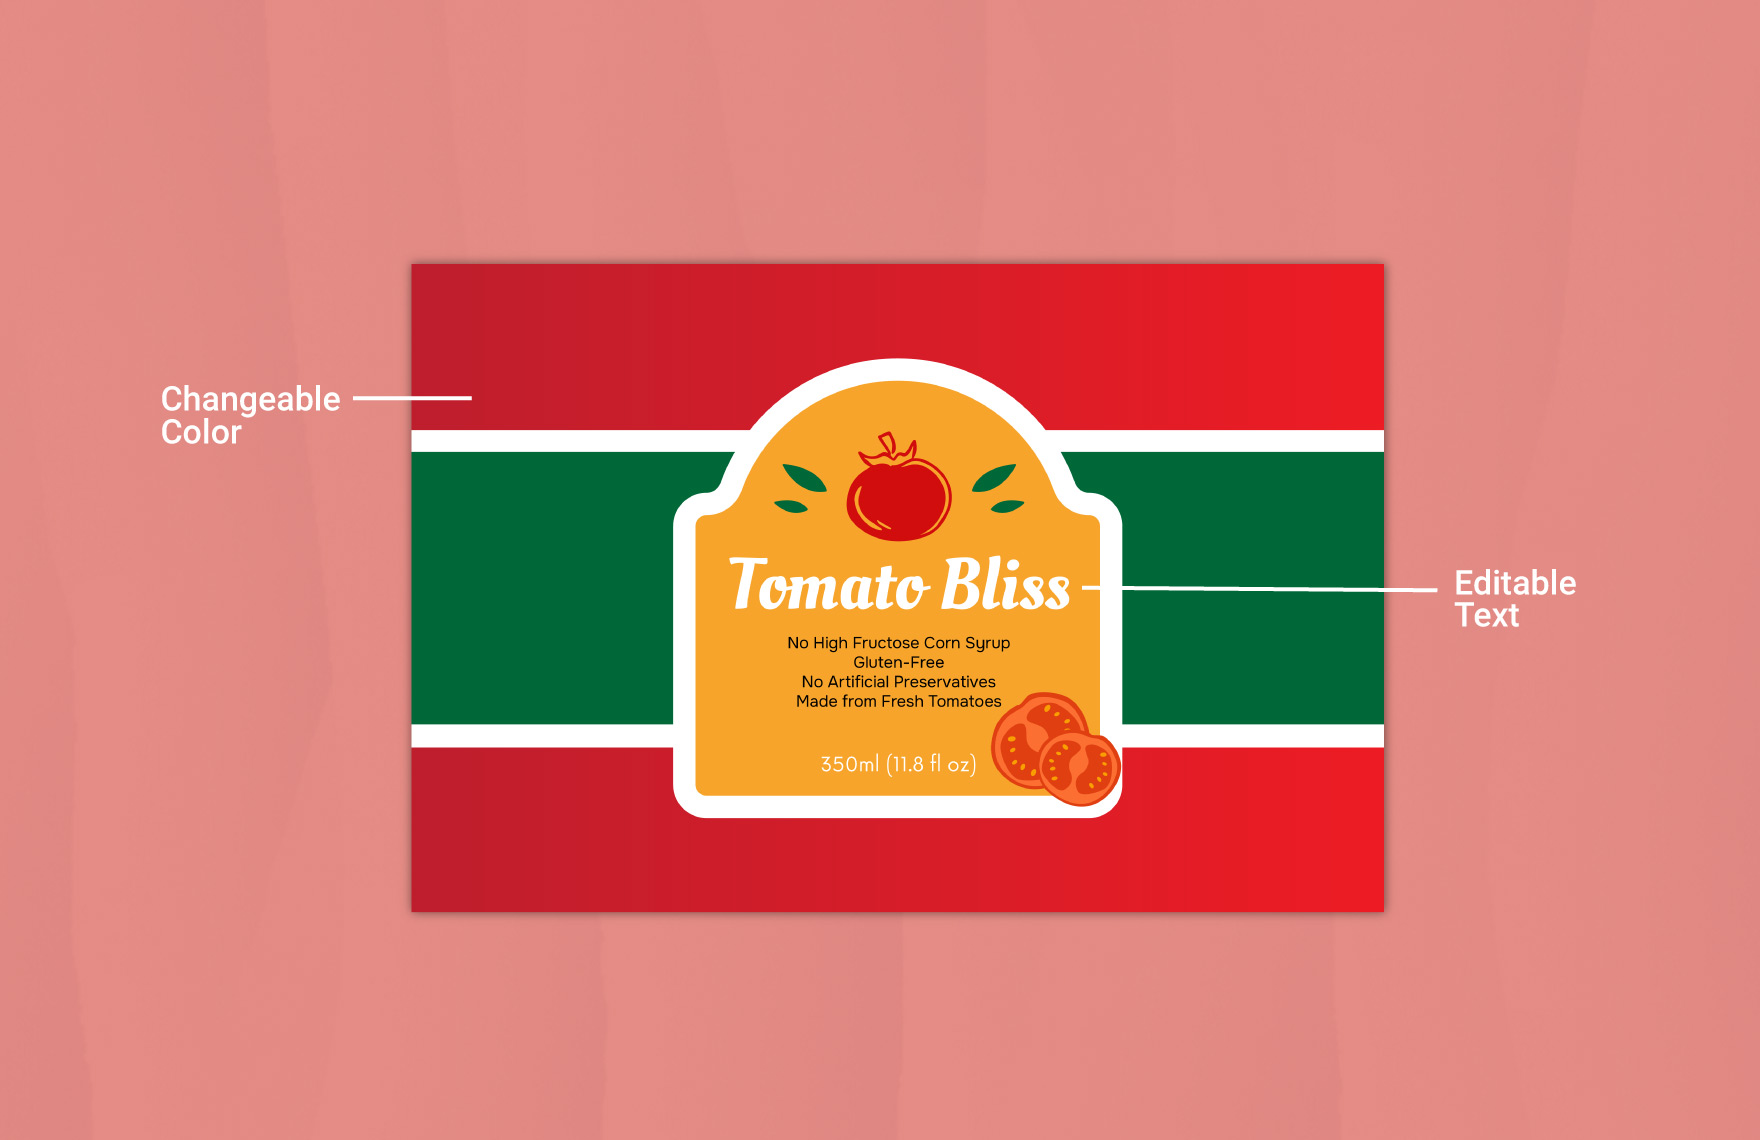 Food Label Template